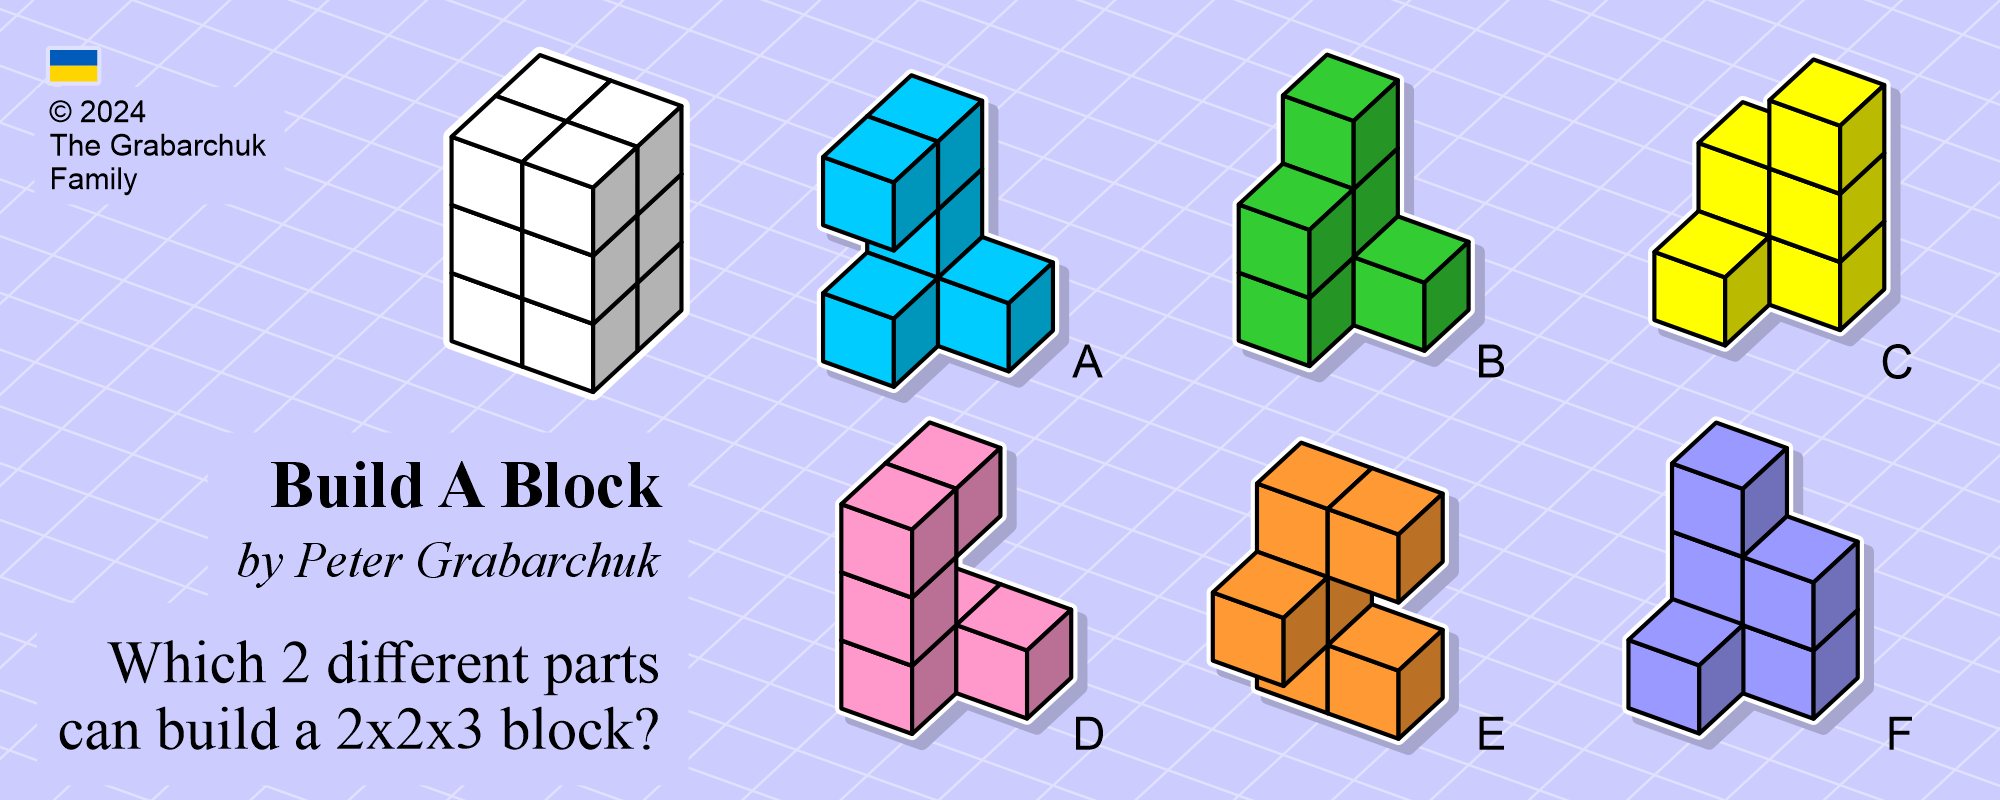 Build a Block by Peter Grabarchuk